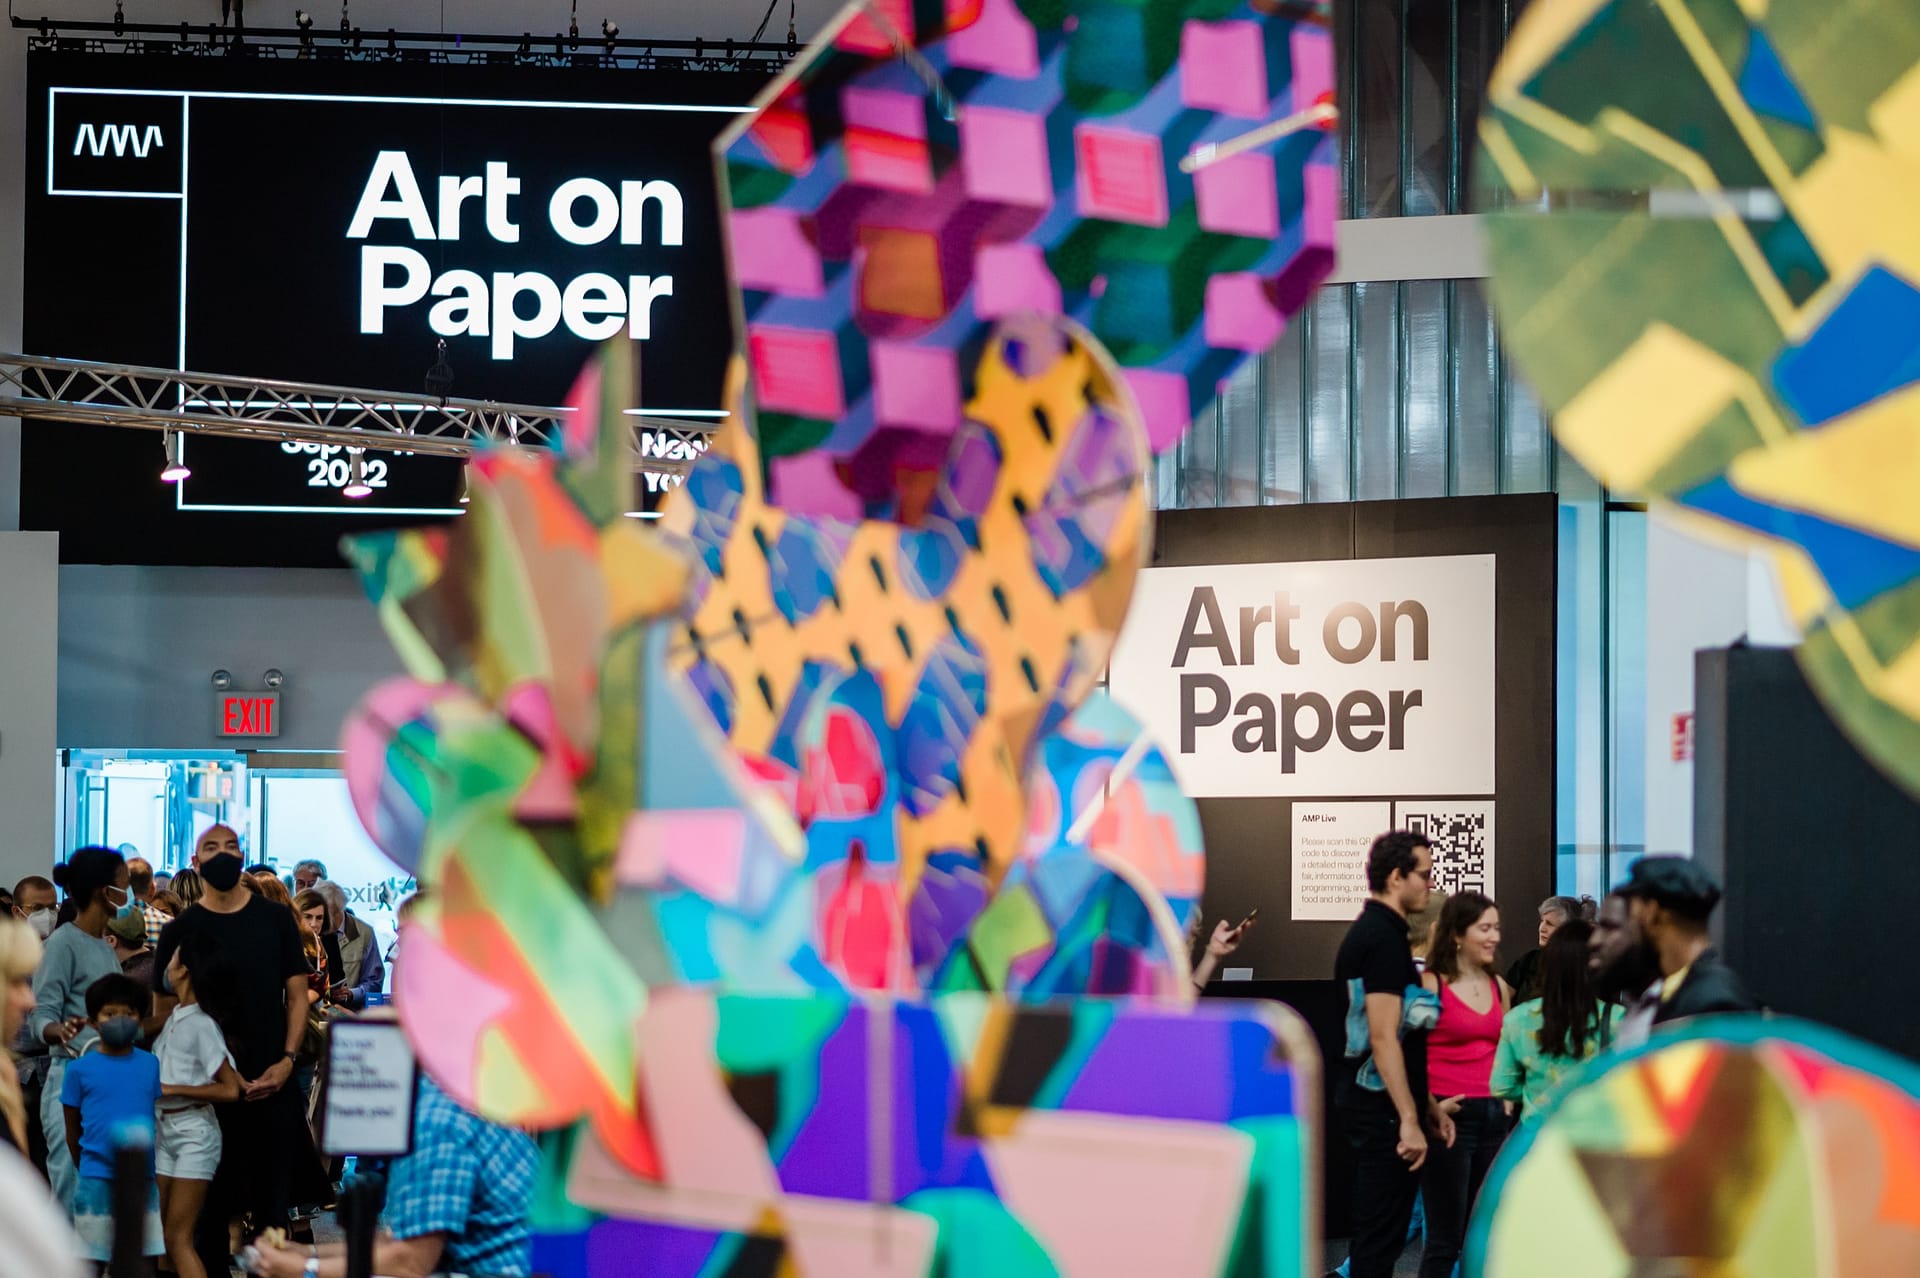 Art on Paper returns to Pier 36 during Armory Arts Week